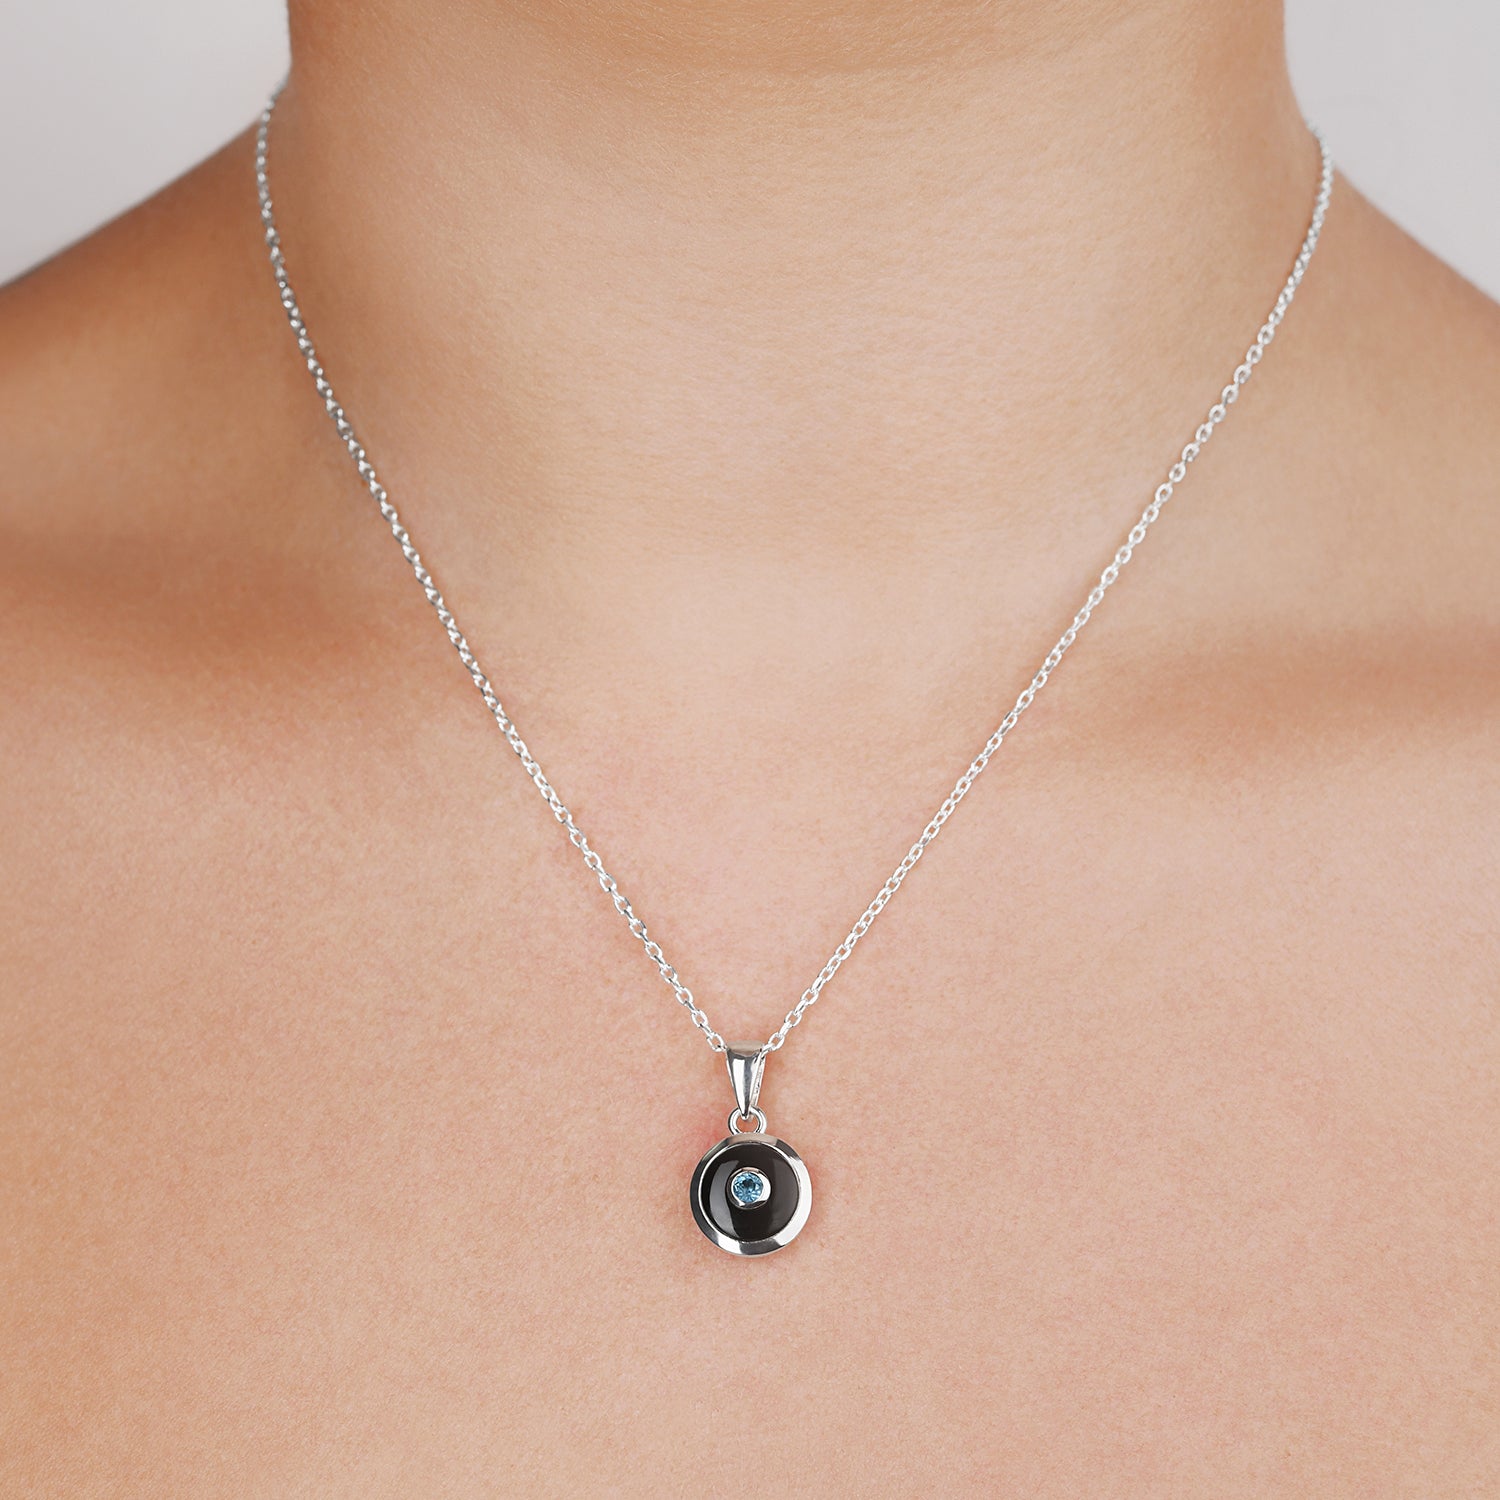 Sterling Silver Adjustable Belcher Chain Necklace With 12mm Round Black Onyx And Blue Topaz Pendant